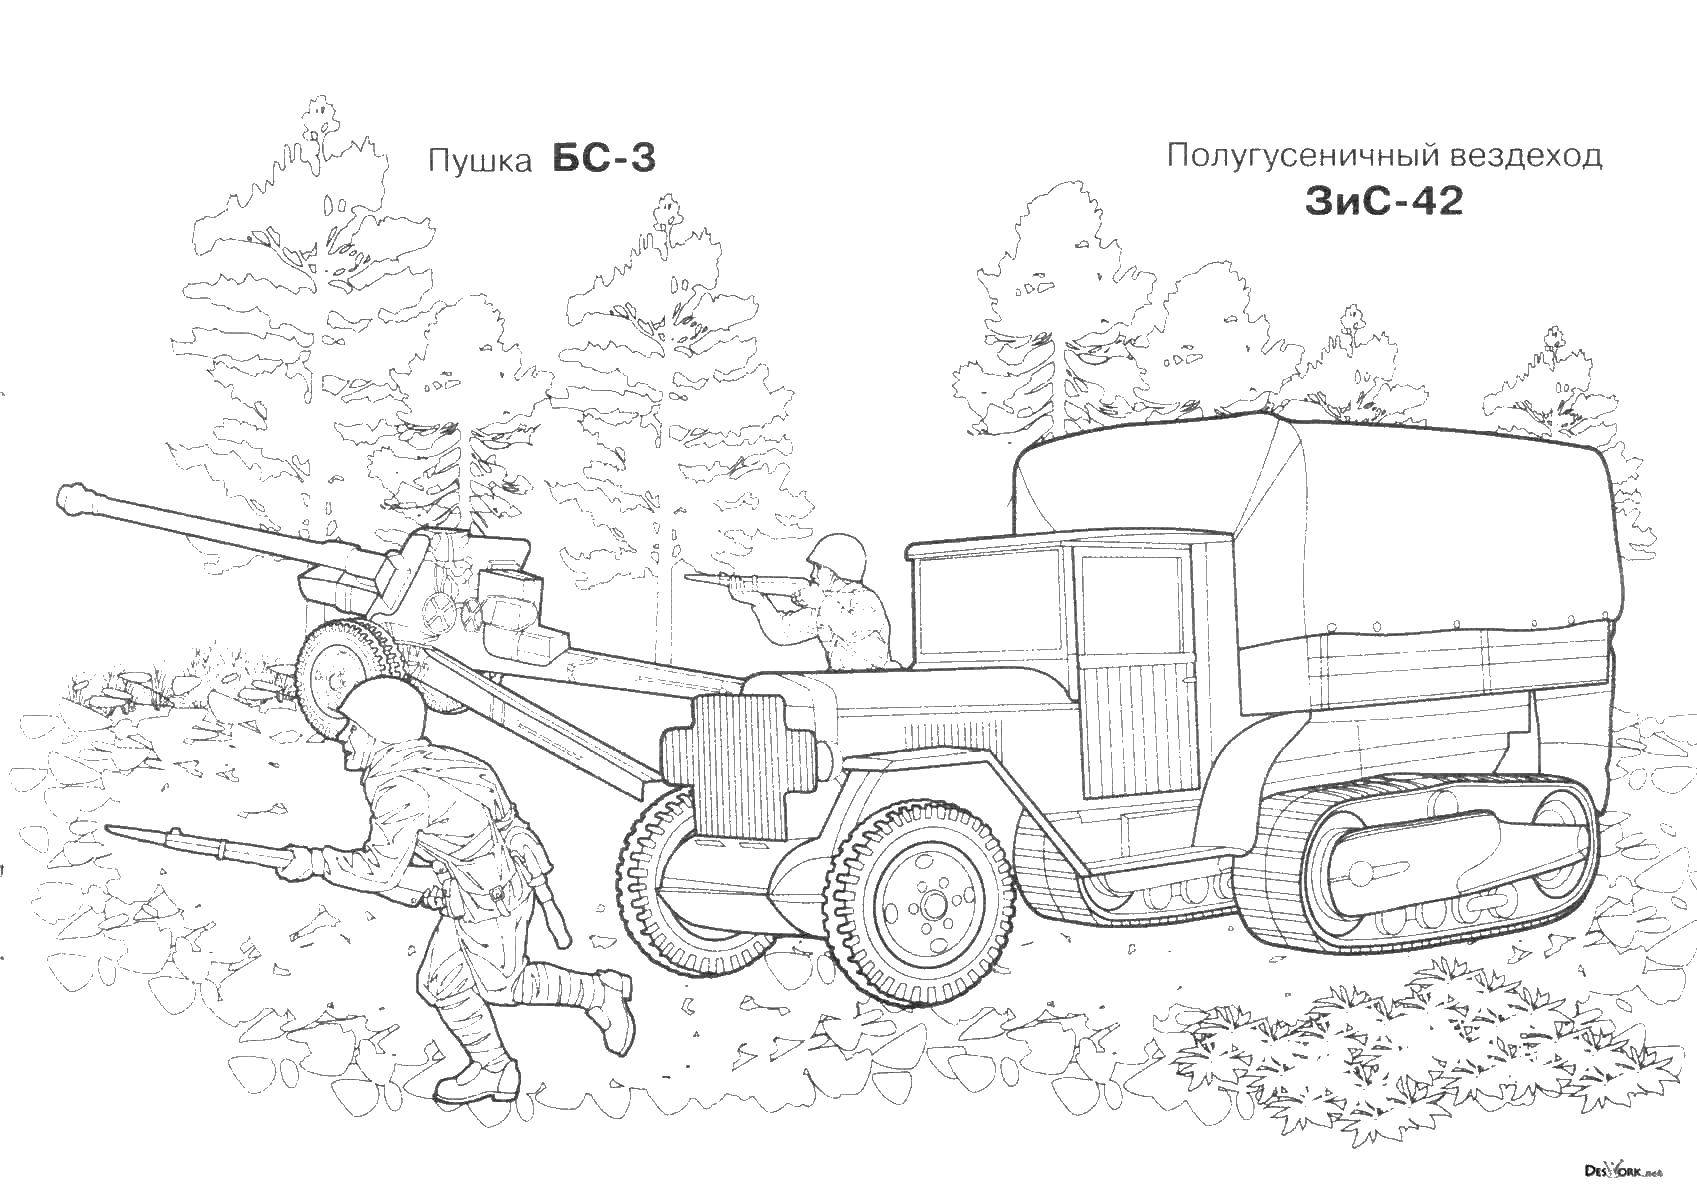 Coloring Gun and half-track all-terrain vehicle. Category Equipment. Tags:  military technology, war, machinery.